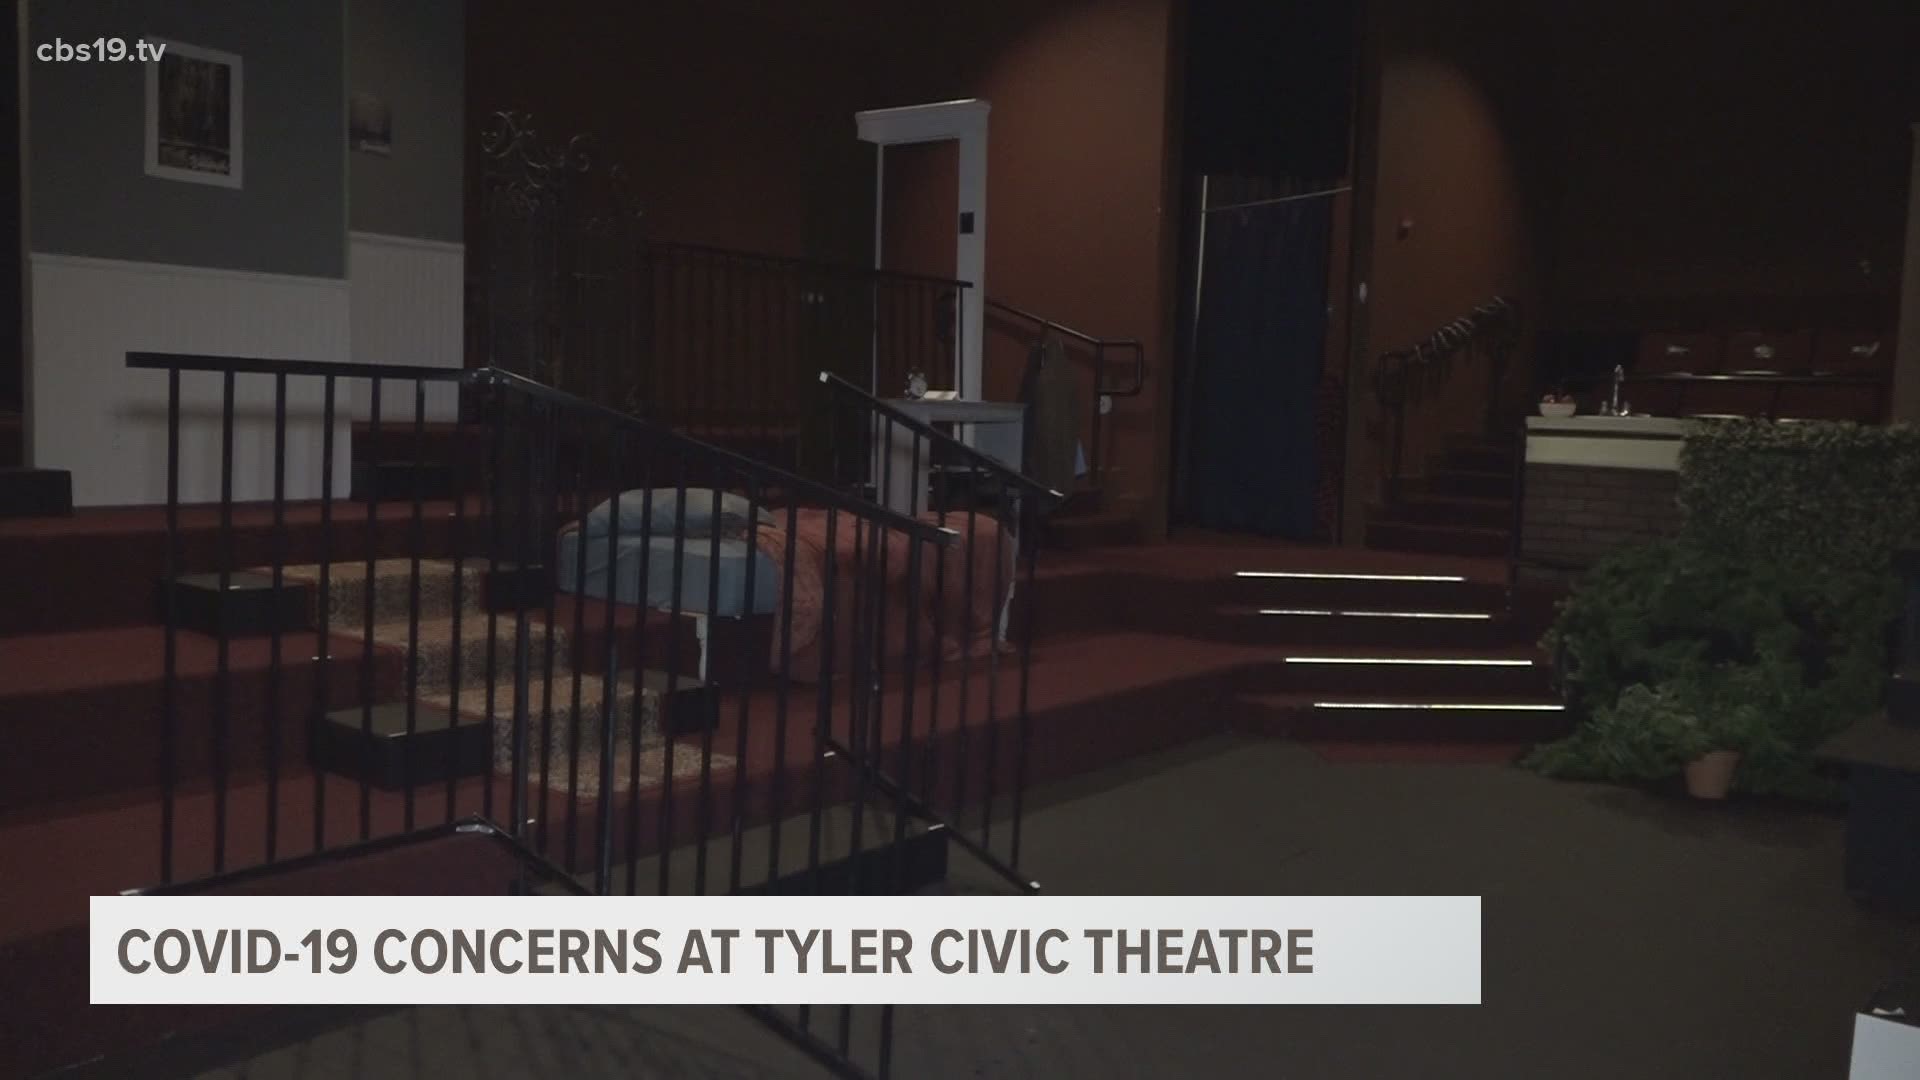 After concerns of a COVID-19 case, Tyler Civic Theatre will proceed with its final performances of "Breakfast at Tiffany's."